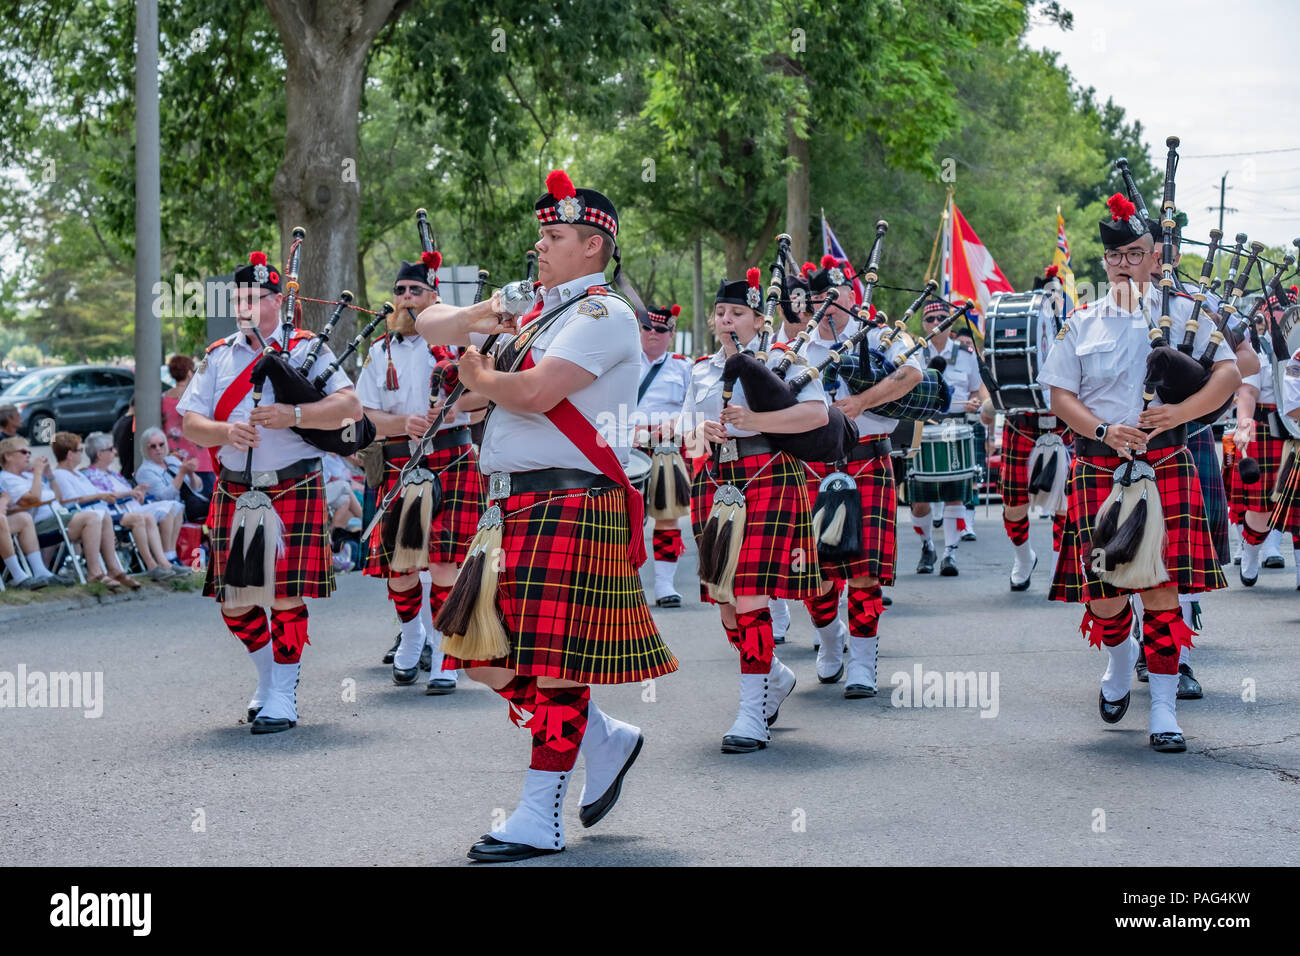 Members of the Midland Ontario Legion Pipes and Drums participate in the 41st Annual Scottish Festival in Orillia Ontario. Stock Photo